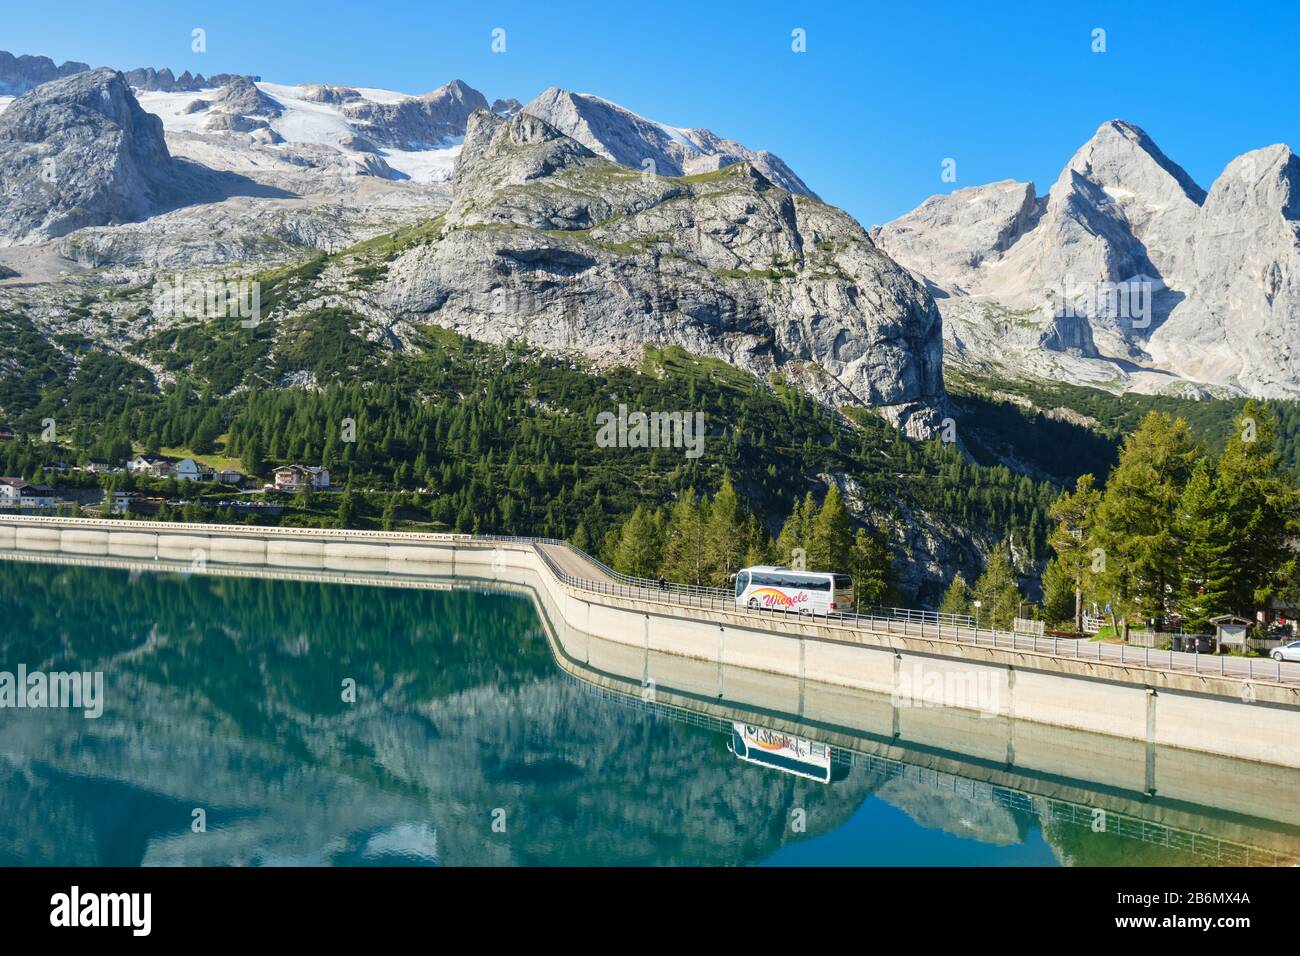 Fedaia Lake, Italy - August 27, 2019: Bus on the Fedaia lake dam, reflected in the turquoise waters, on a bright sunny day, with Marmolada glacier in Stock Photo